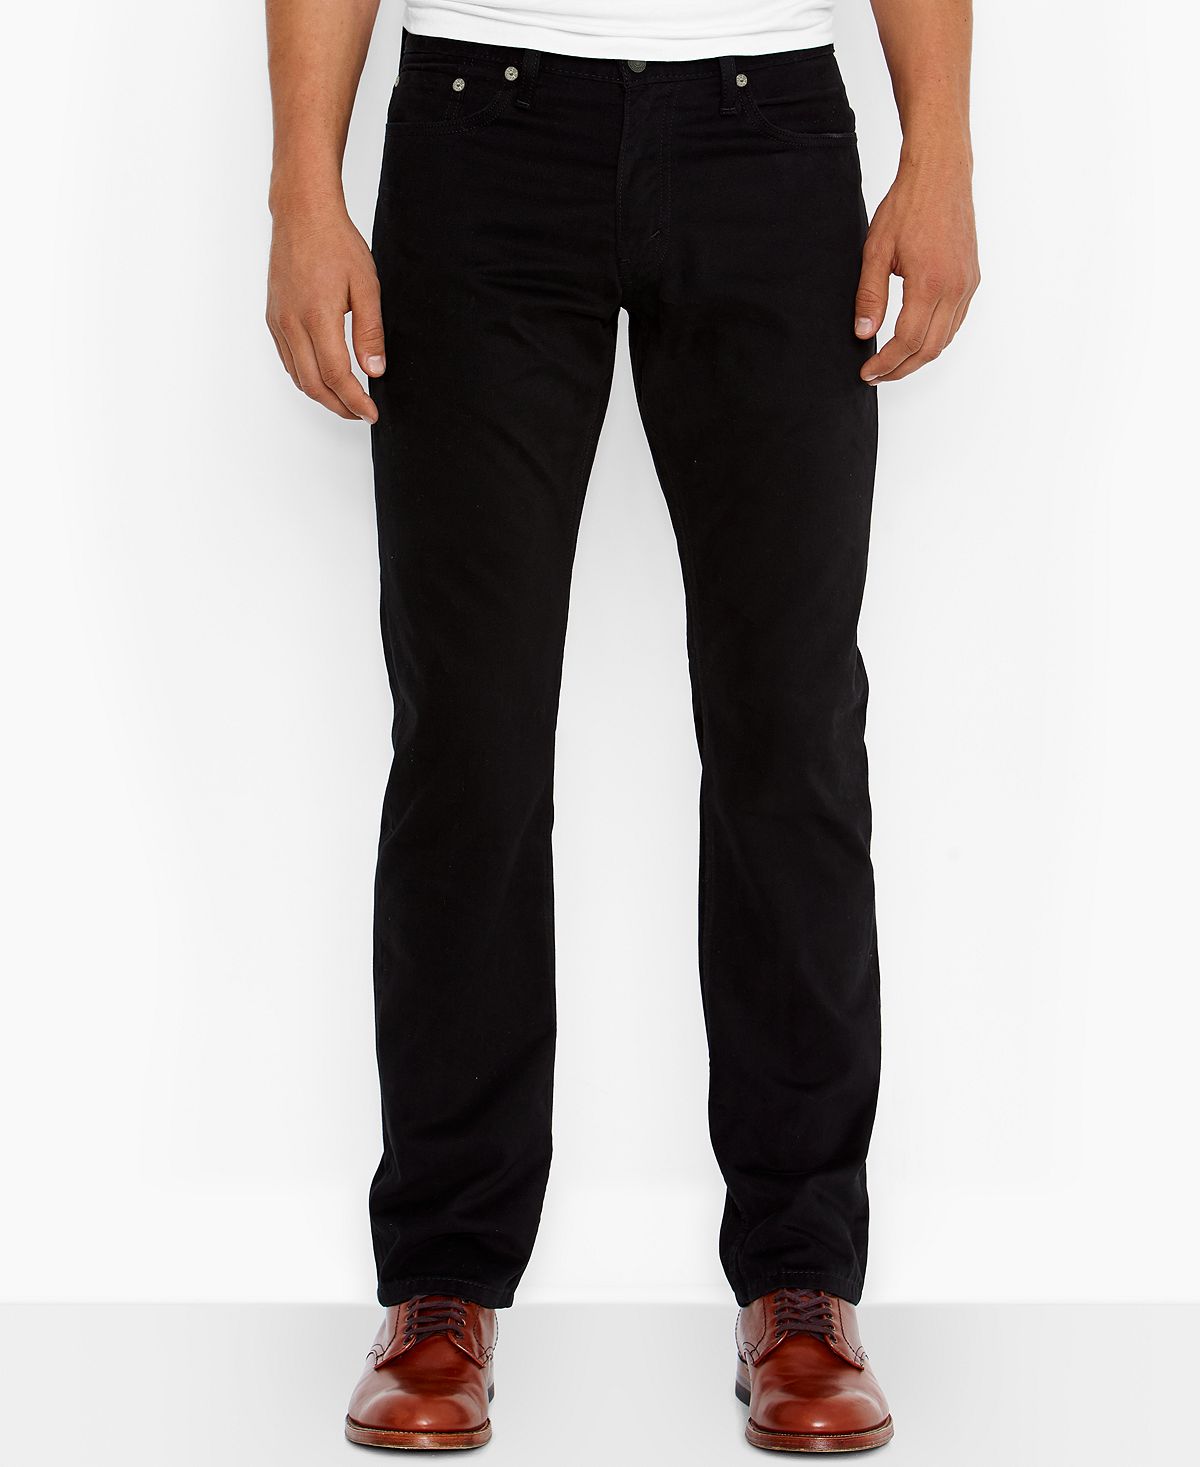 Levi's 514 Straight Fit Jeans